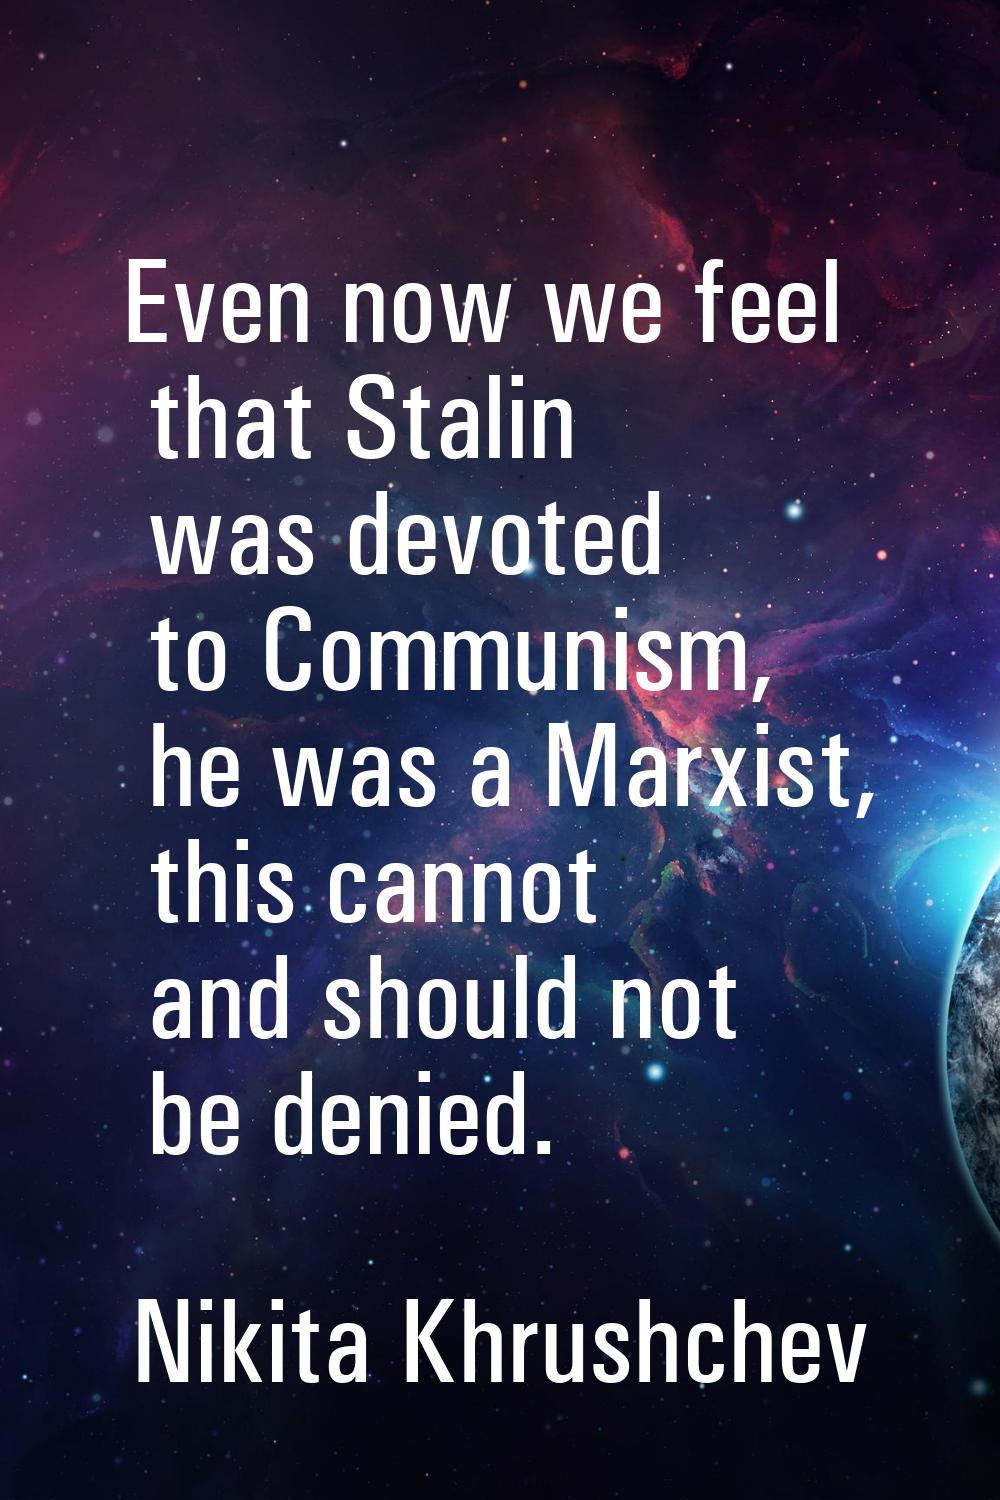 Even now we feel that Stalin was devoted to Communism, he was a Marxist, this cannot and should not